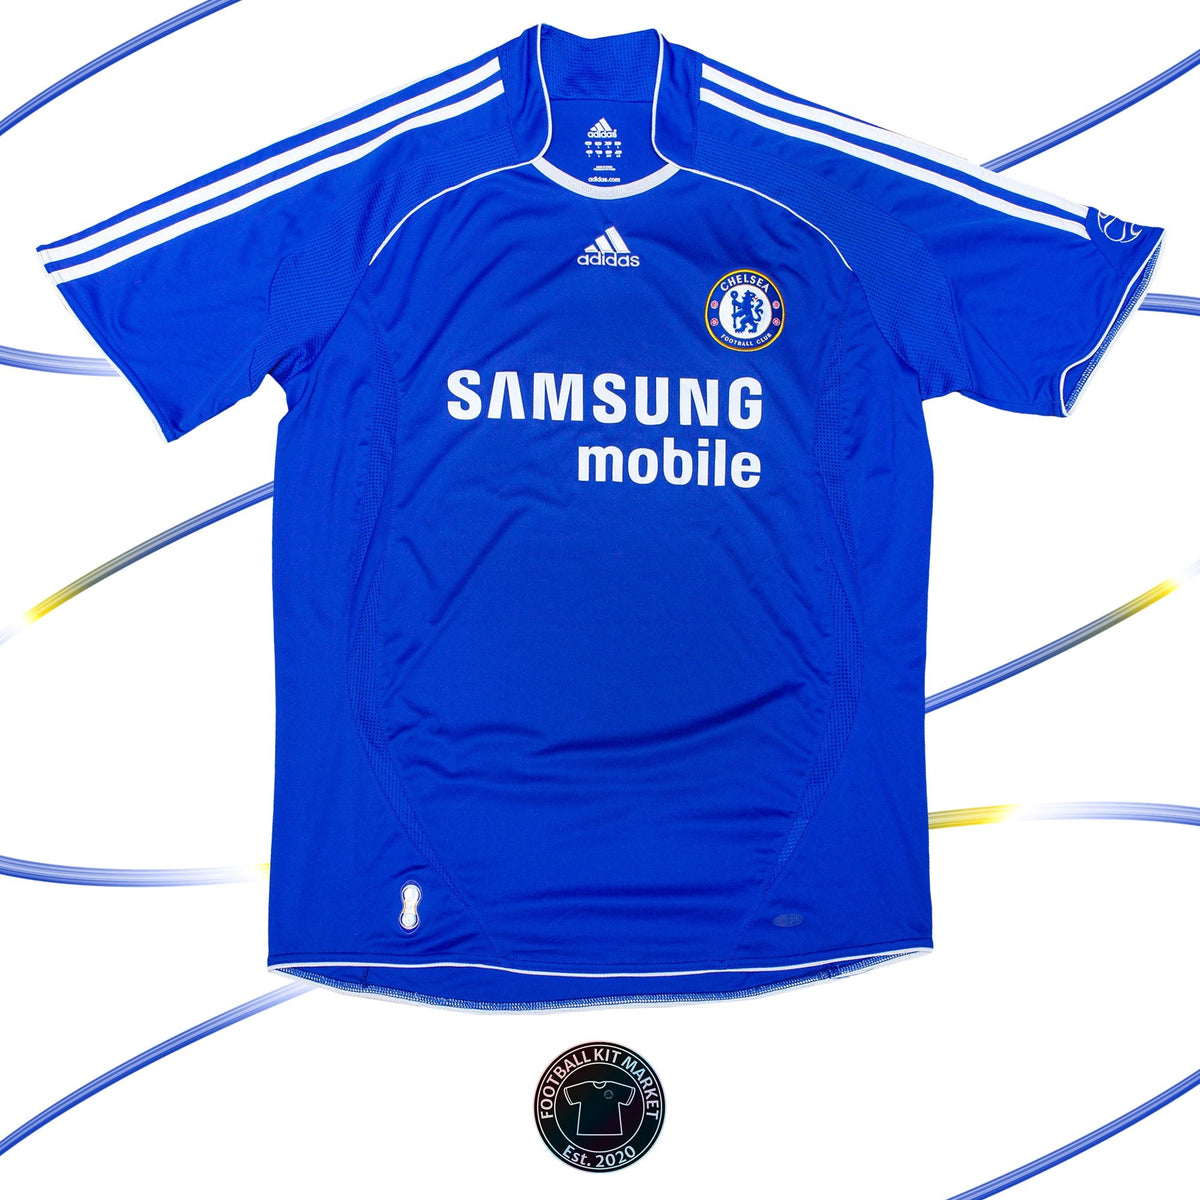 Genuine CHELSEA Home Shirt (2006-2008) - ADIDAS (L) - Product Image from Football Kit Market